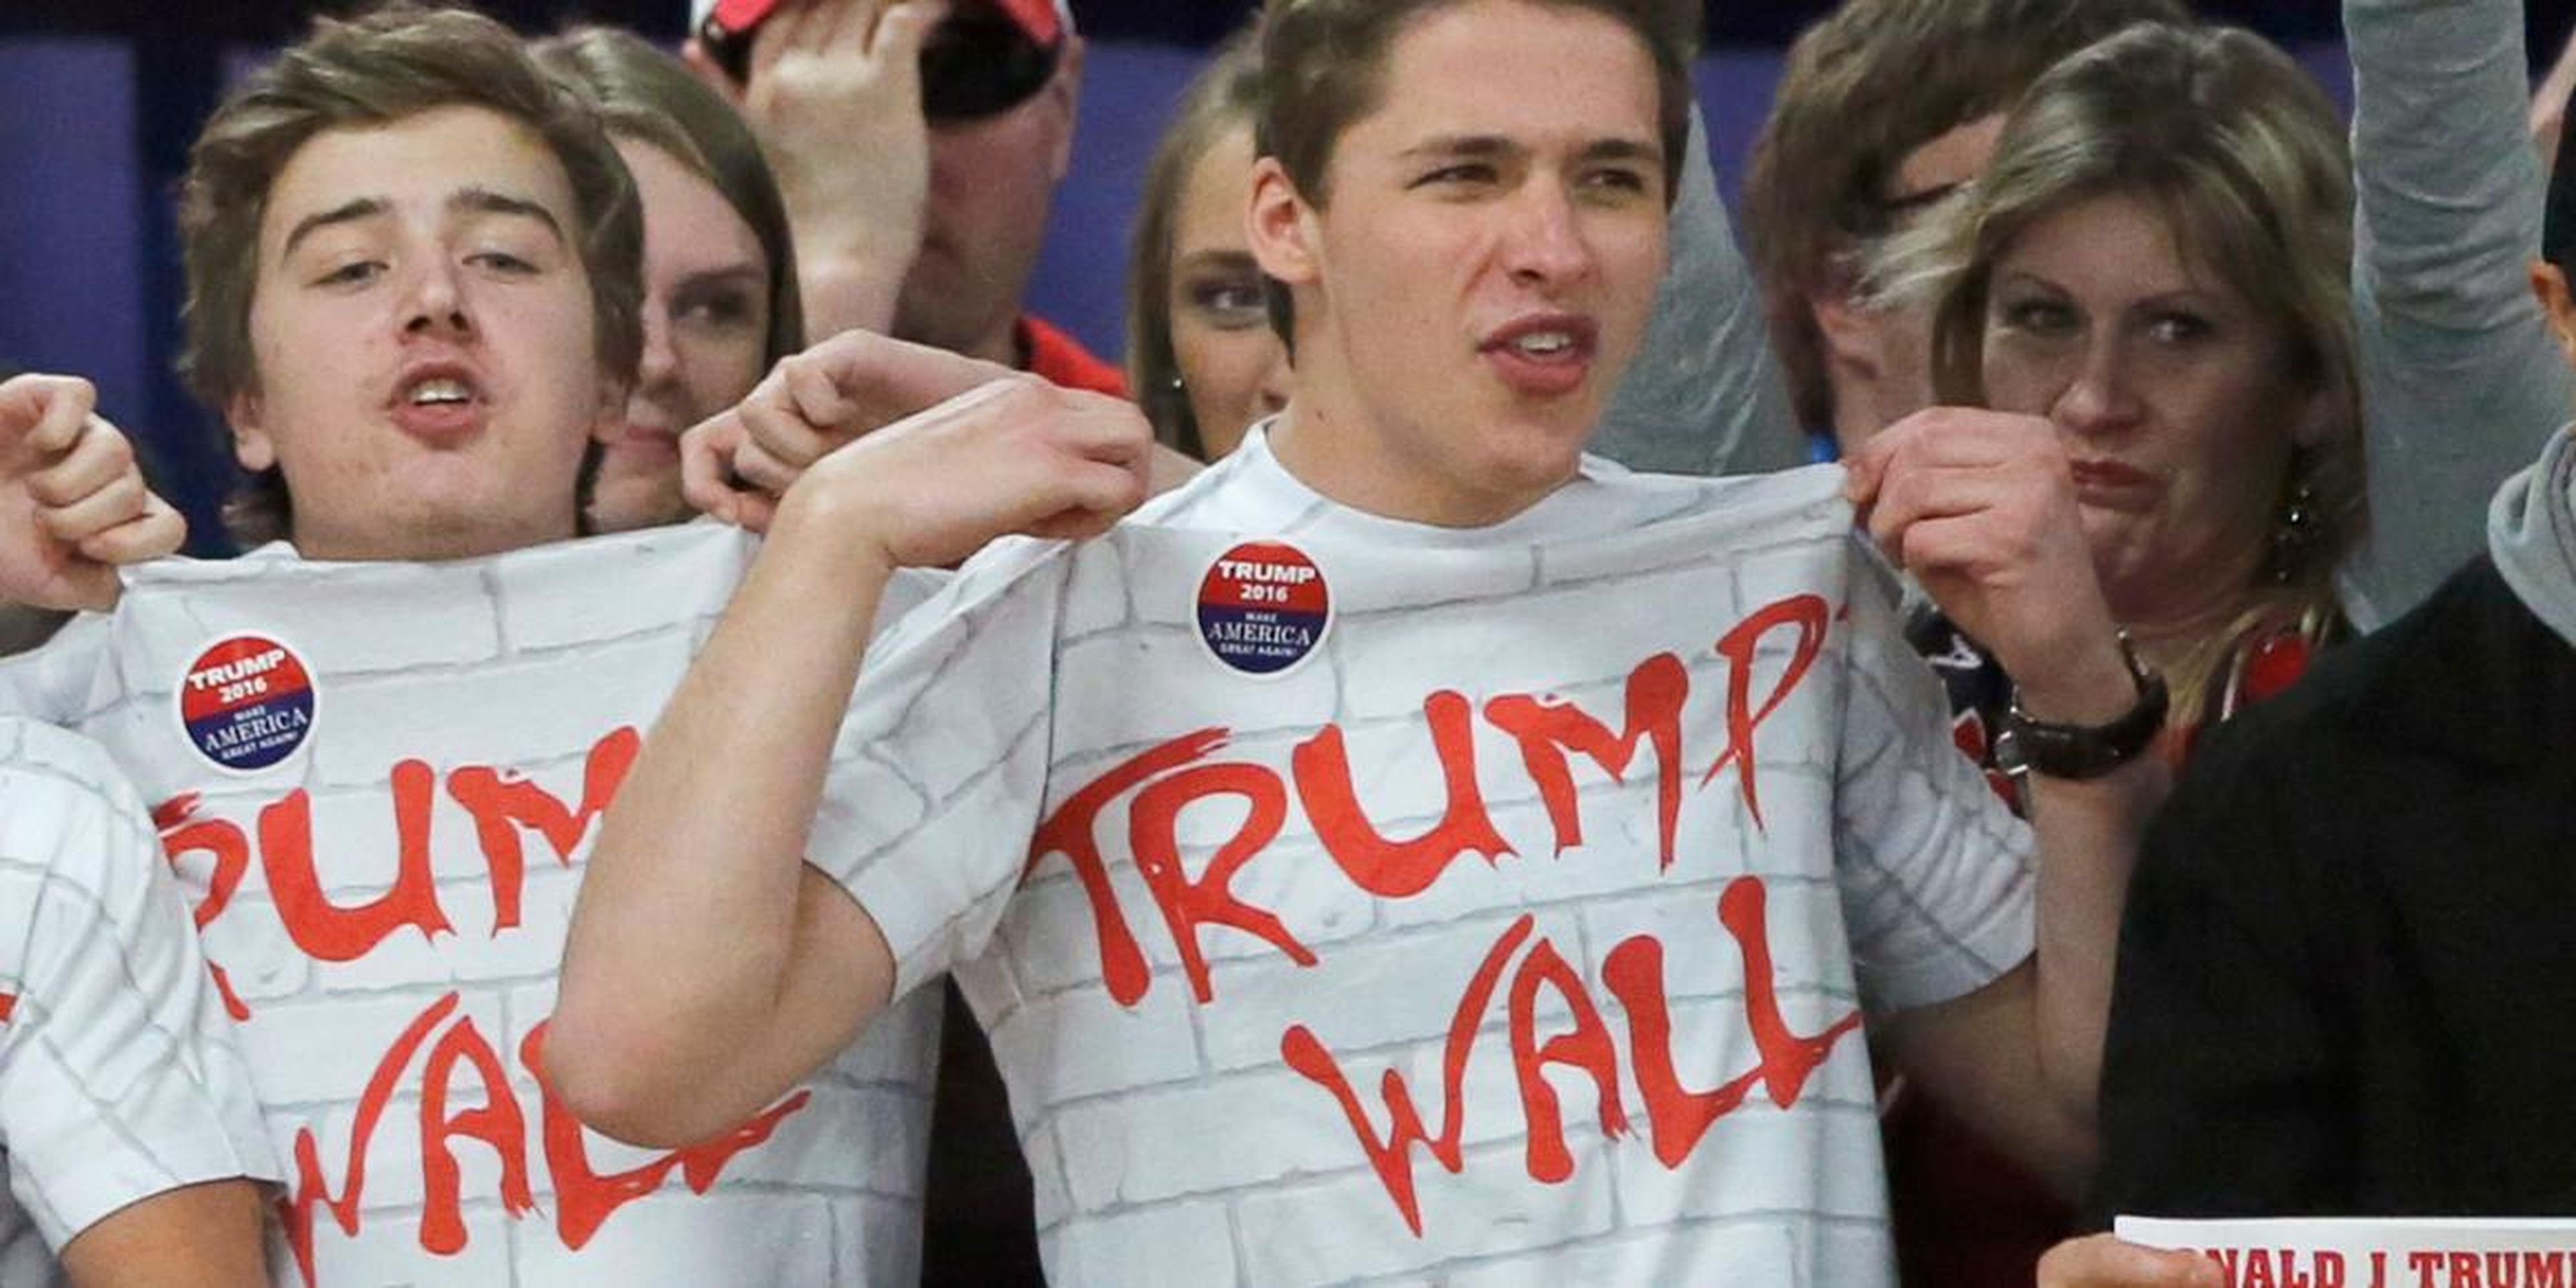 Supporters chanting "build that wall" at a rally for Trump, then a Republican presidential candidate, in Rothschild, Wisconsin, in April 2016.